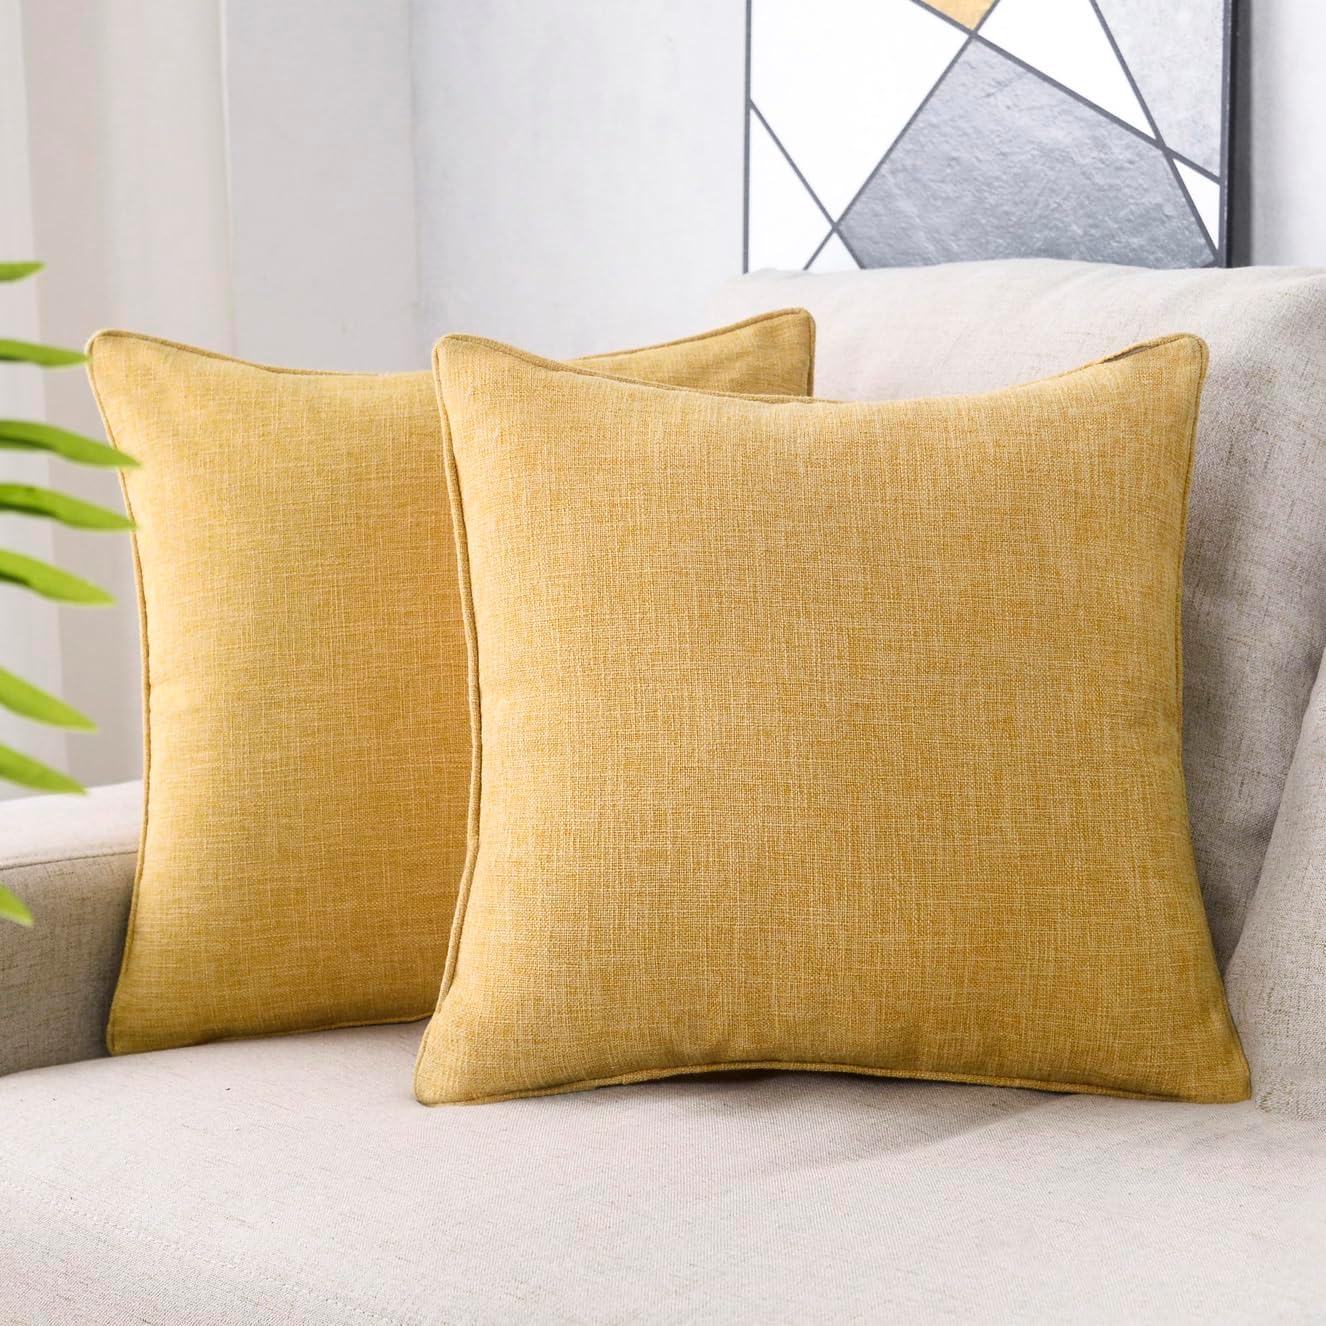 HPUK Linen Throw Pillow Covers Pack of 2, 18x18 Inch Accent Cushion Covers for Living Room, Bedroom, Decorative Solid Color Pillow Covers for Couch, Sofa, Chair, Ochre